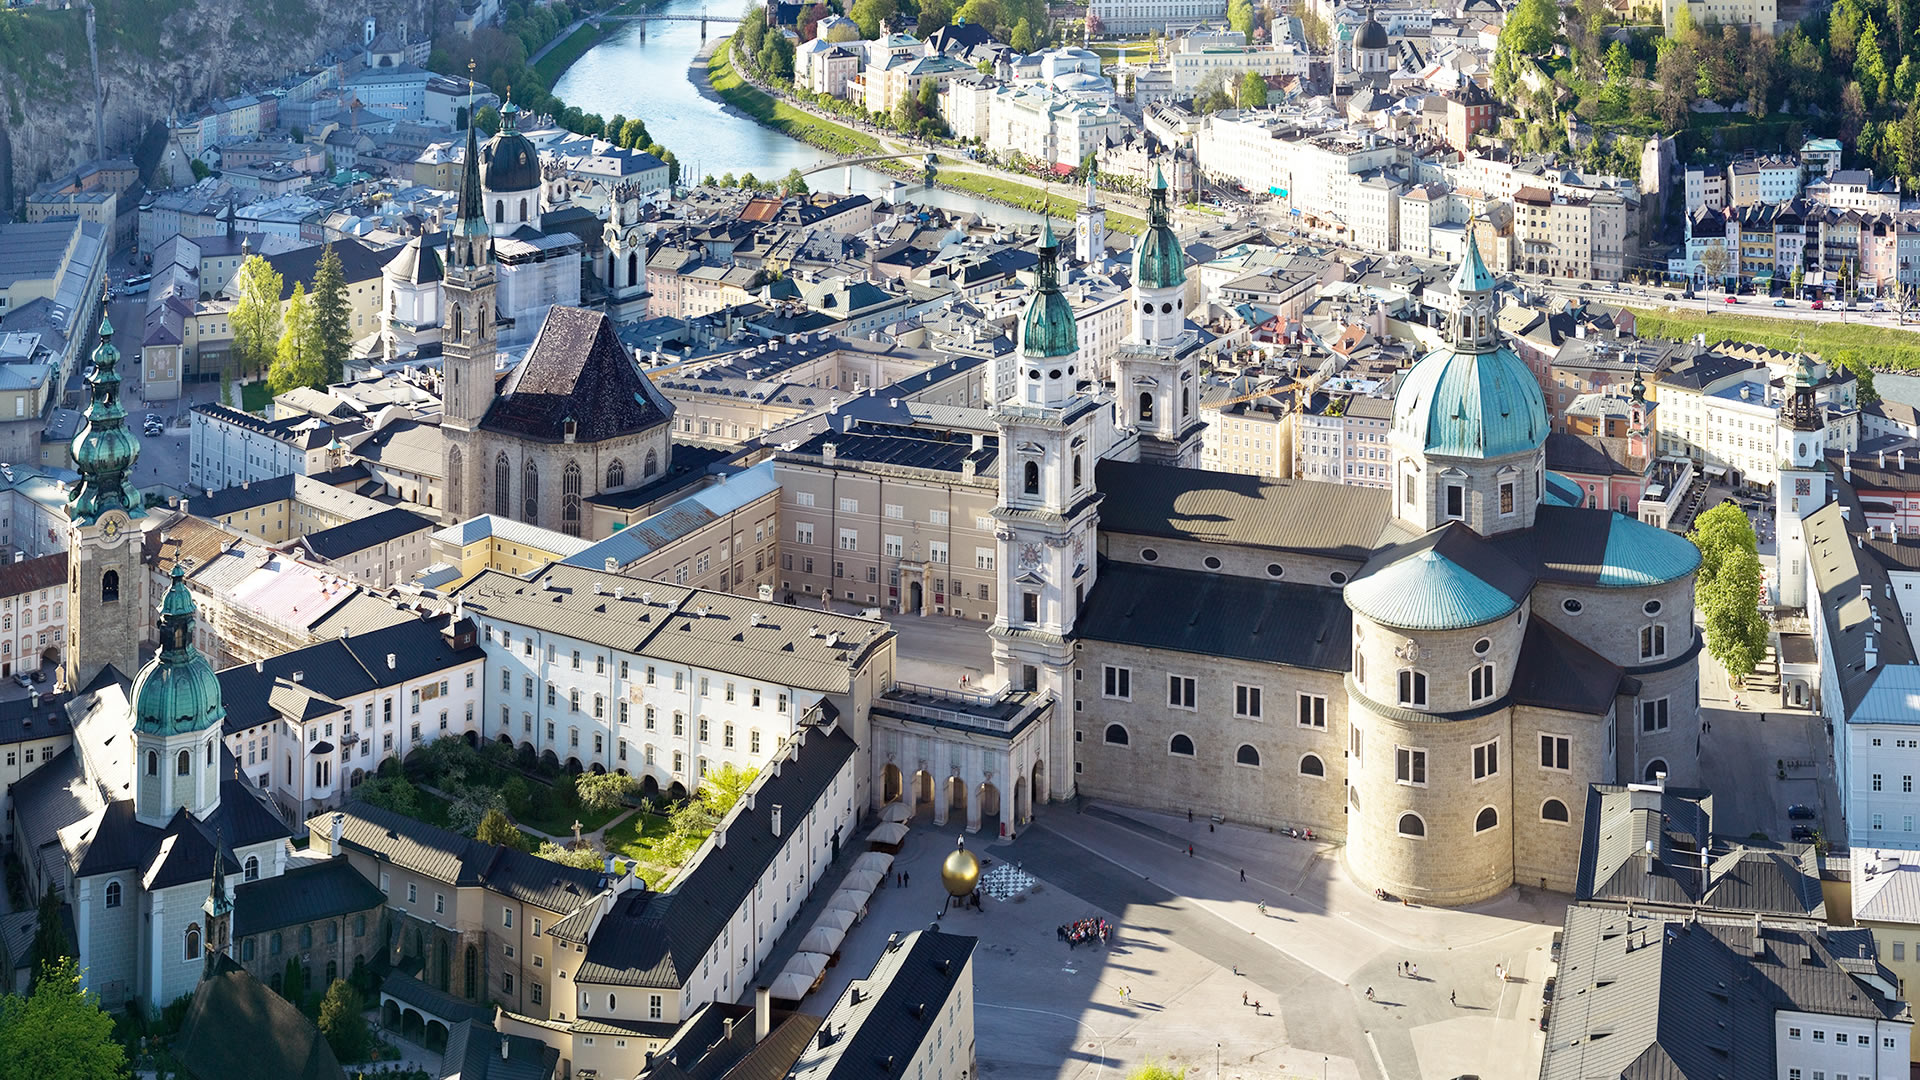 Adorable Aerial View Of The Salzburger Dom